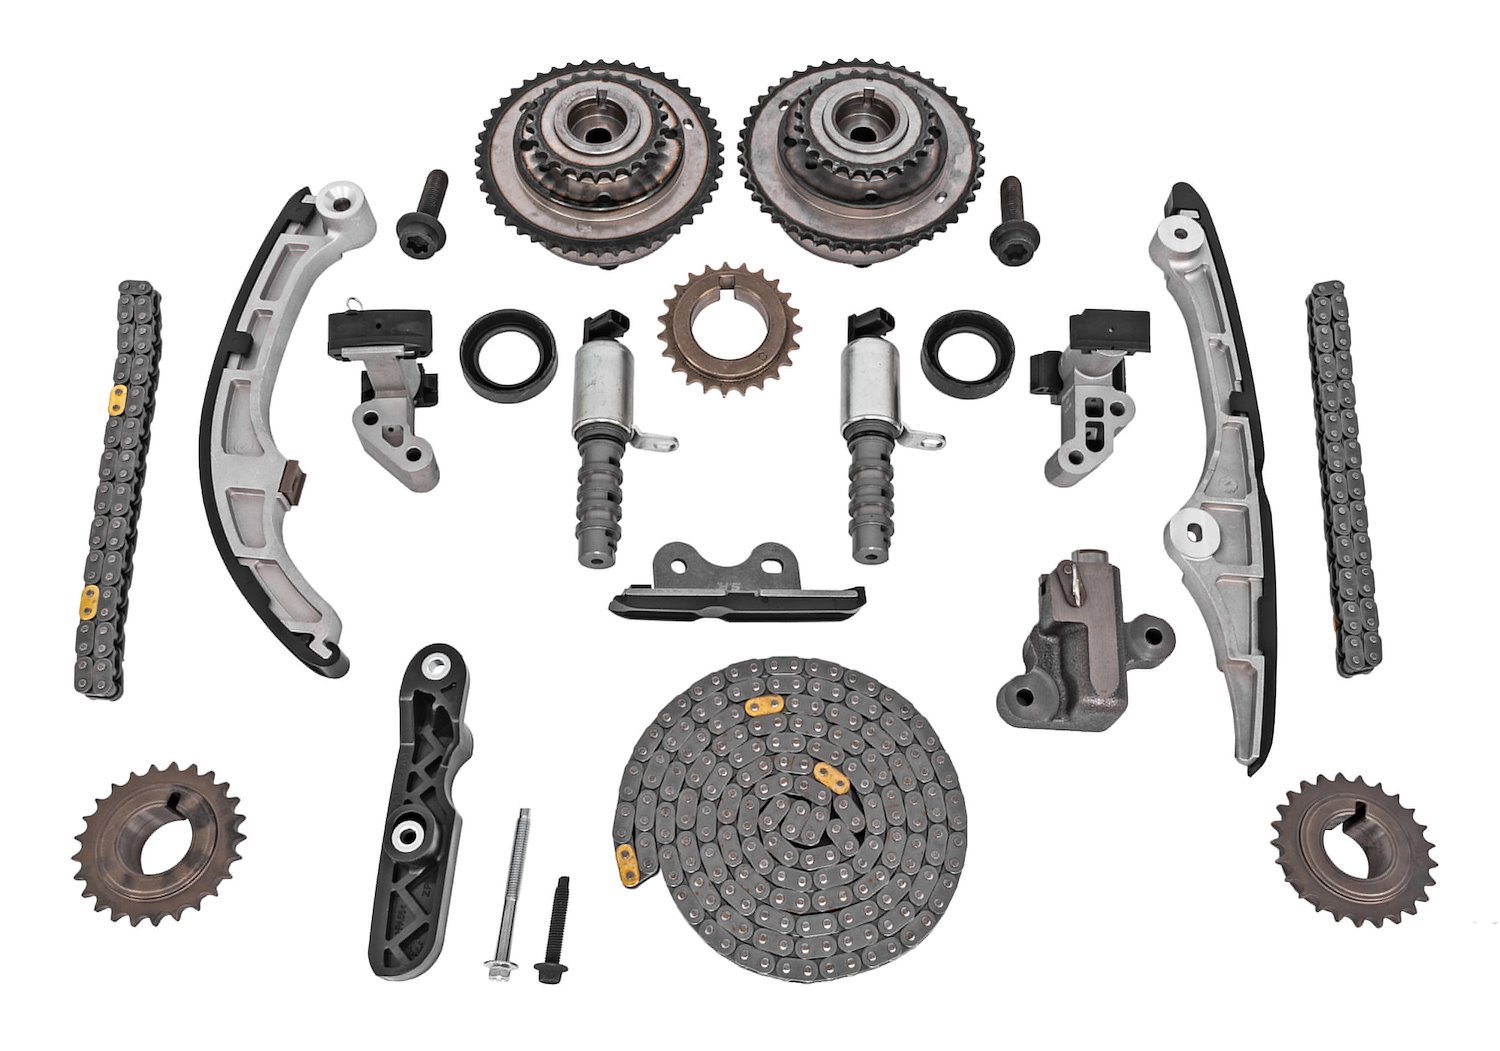 Timing Chain Kit w/VVT Solenoids for 2007-2011 Ford, Mercury, Lincoln Cars & SUVs 3.5L, 3.7L V6 Engines